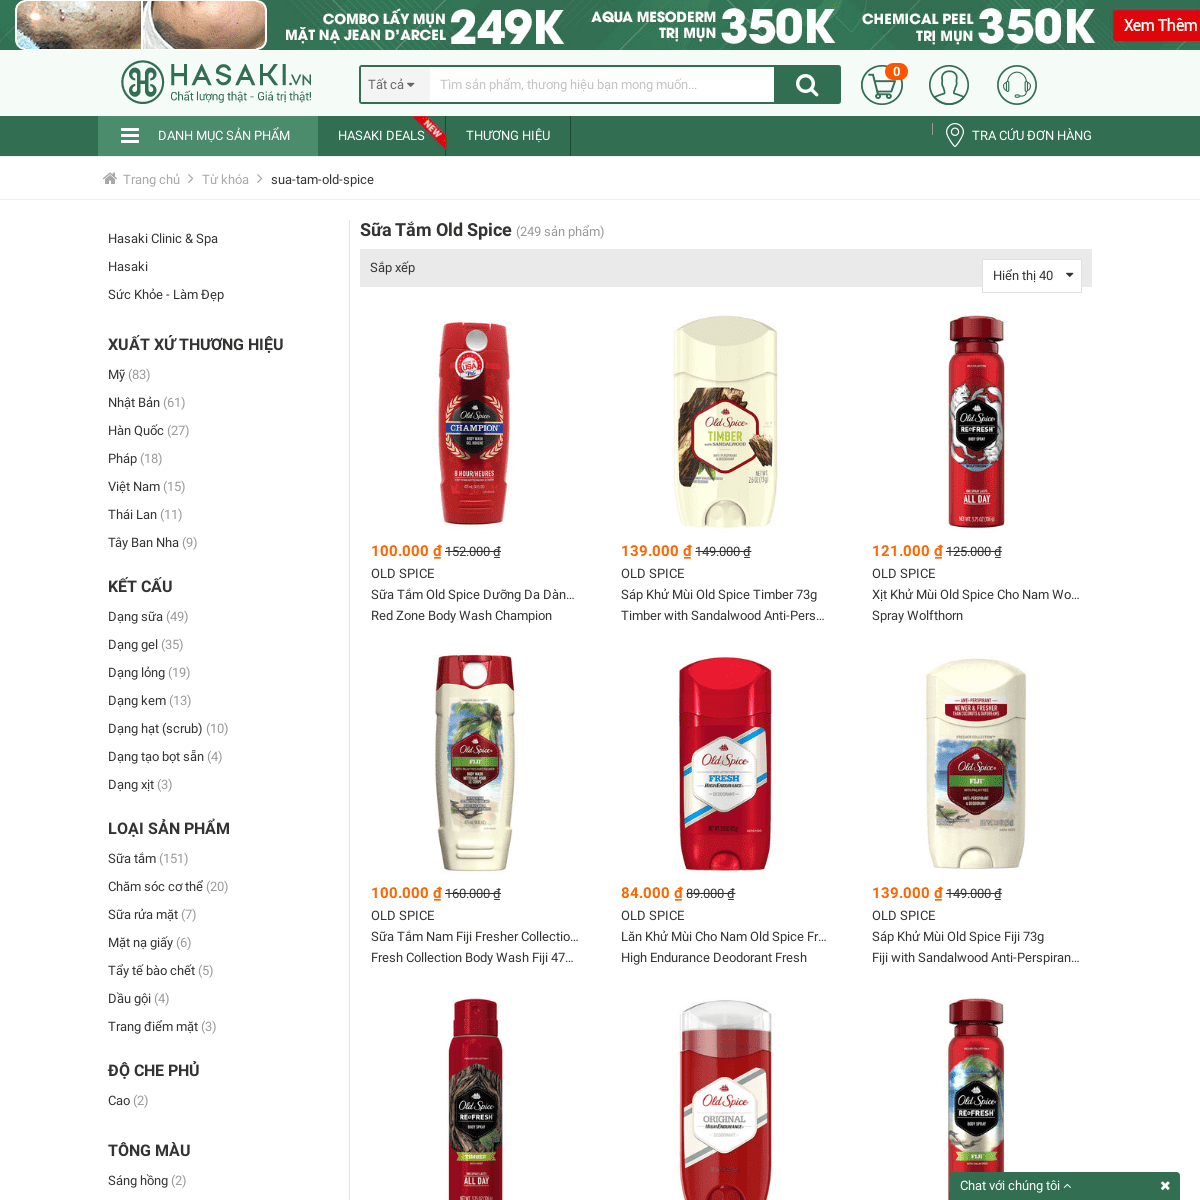 A complete backup of https://hasaki.vn/tag/sua-tam-old-spice.html